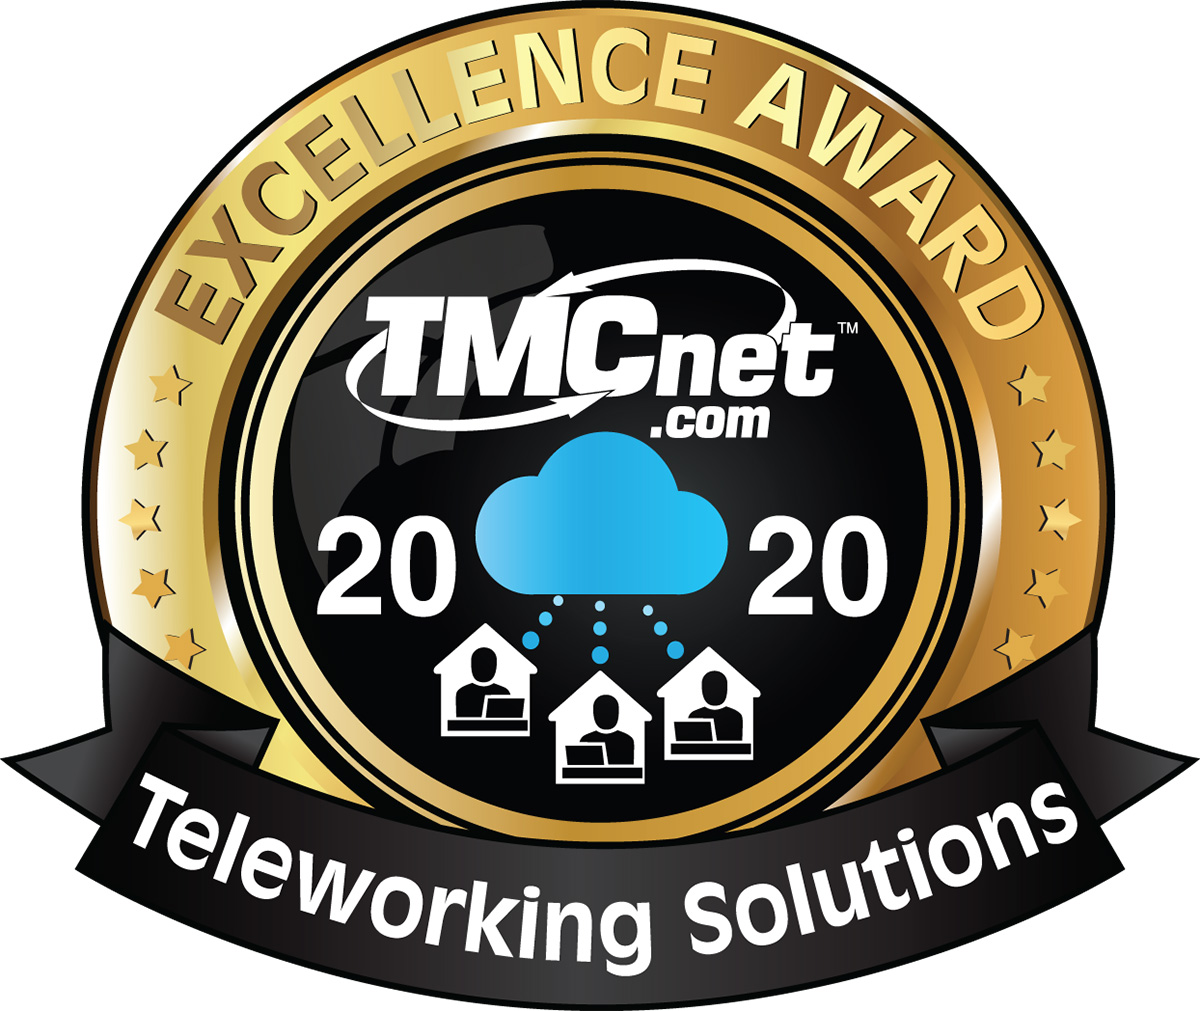 Wildix Awarded 2020 TMCnet Teleworking Solutions Excellence Award